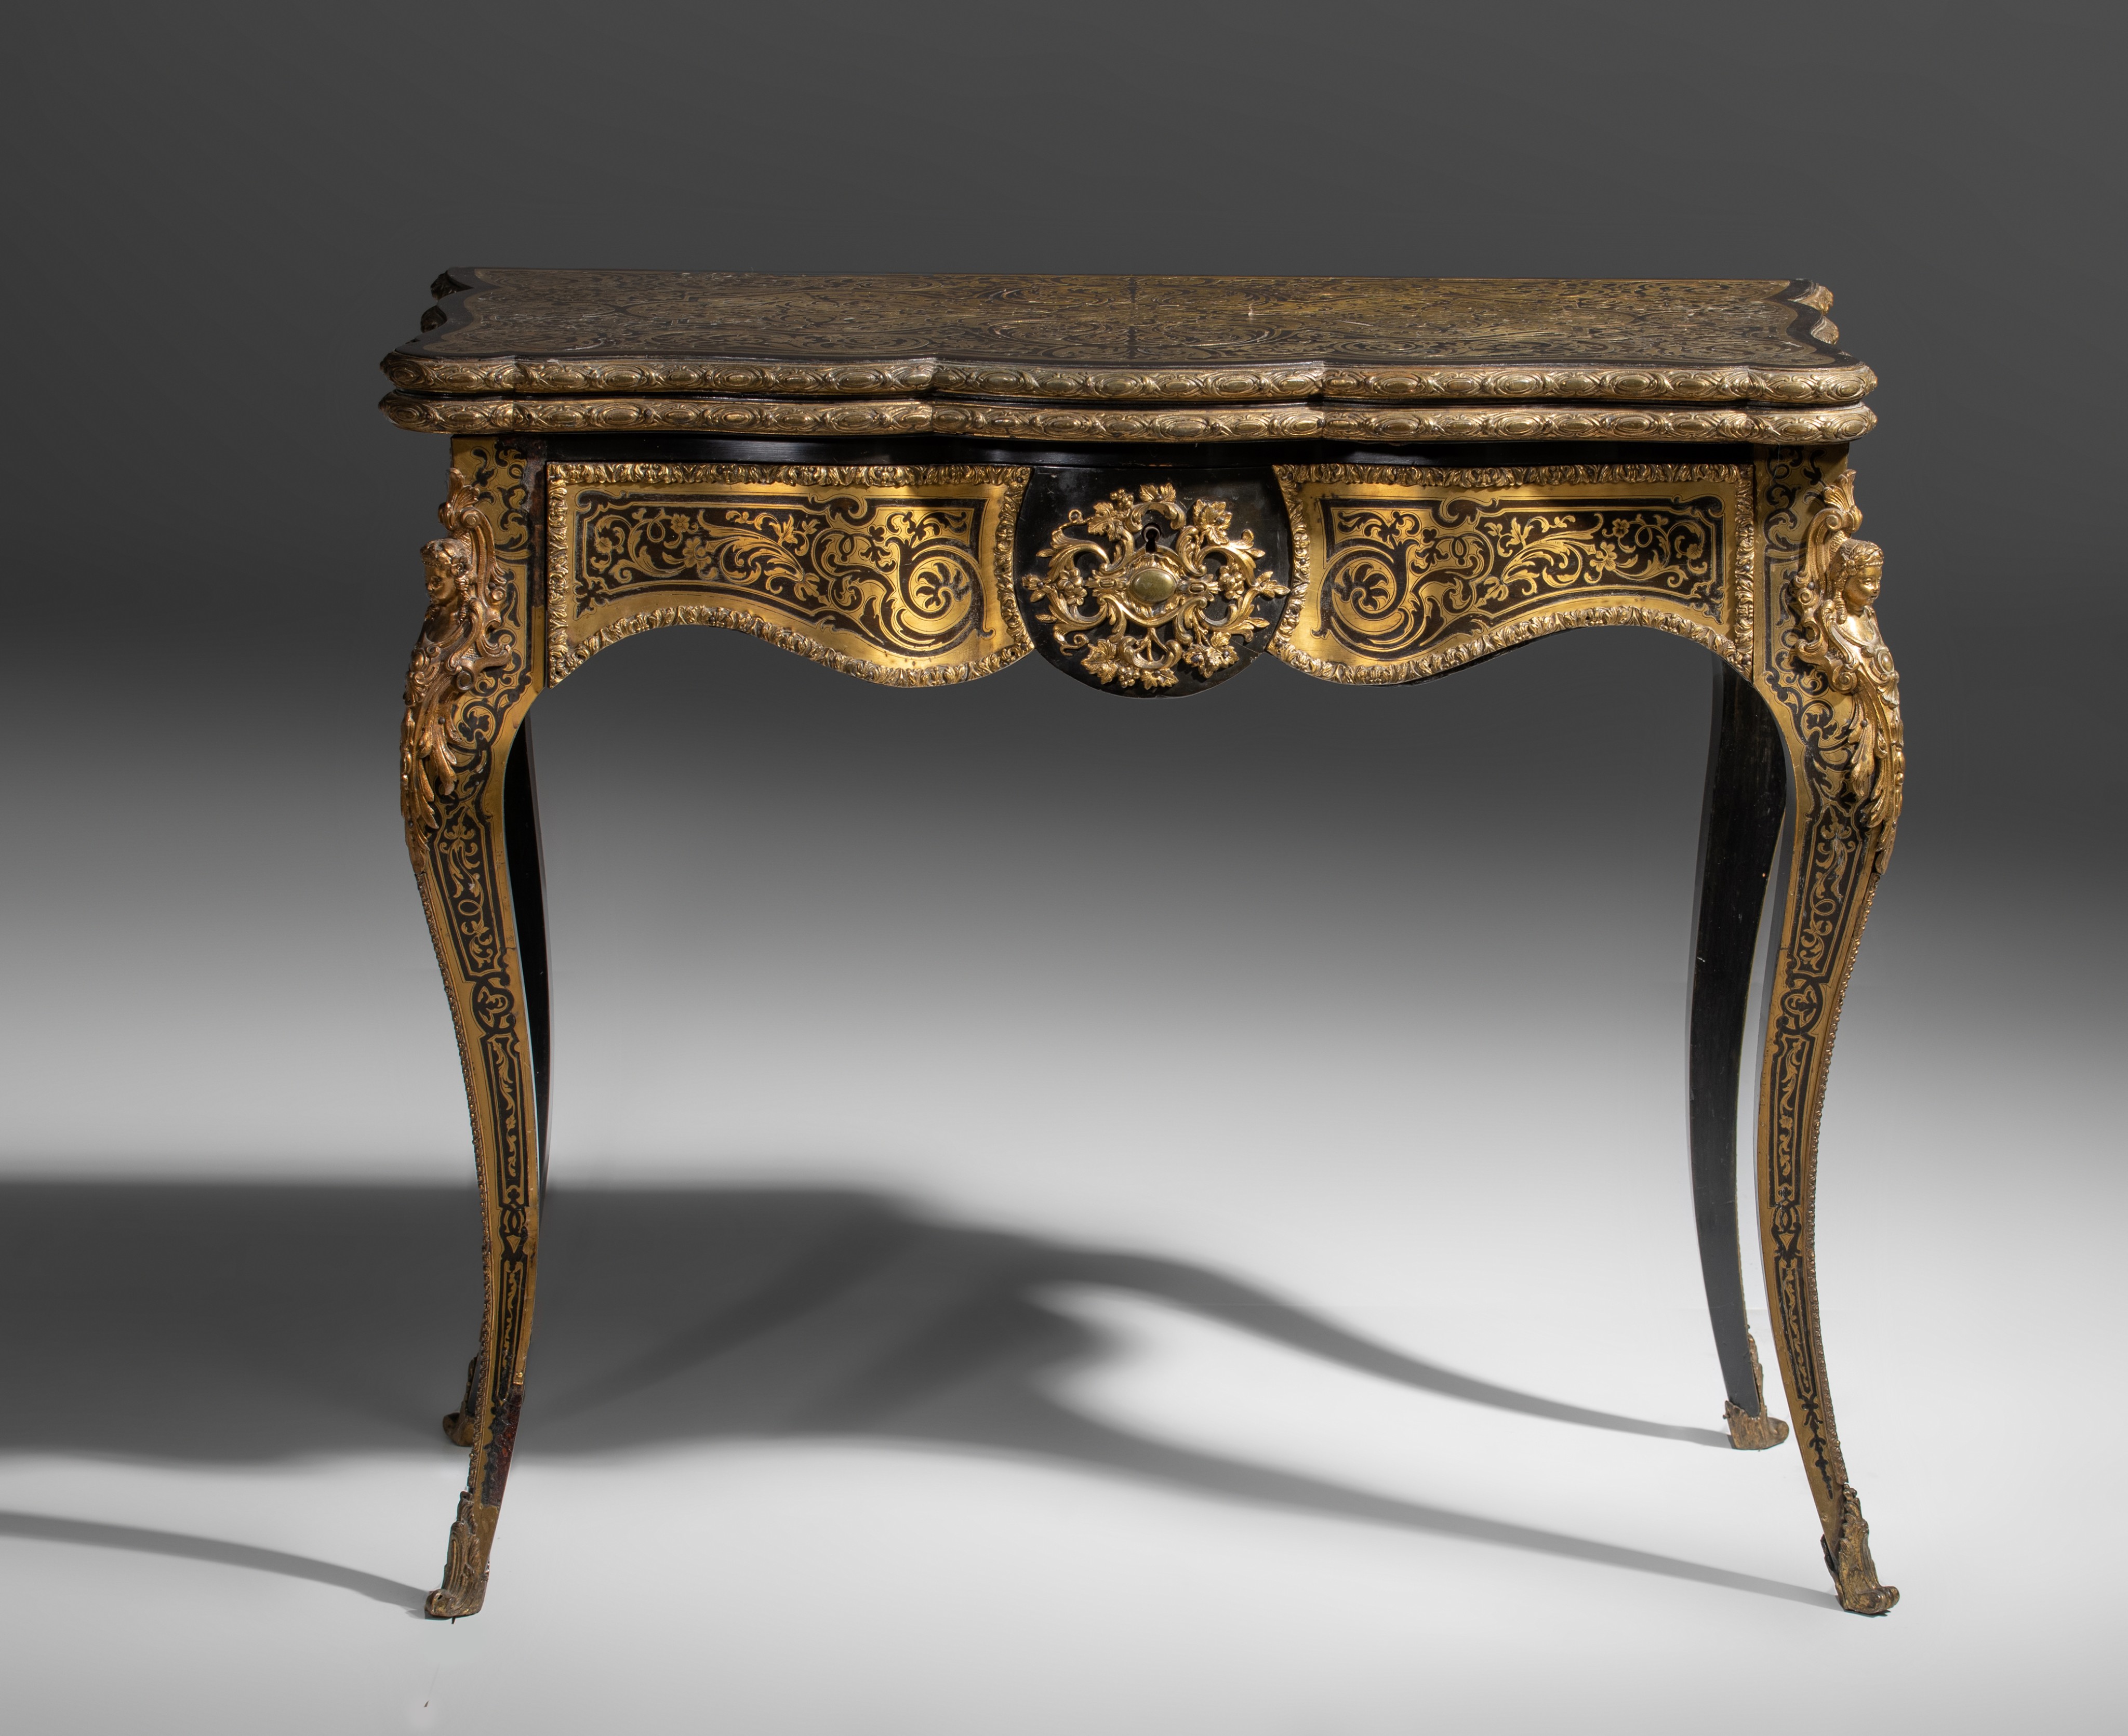 A fine Napoleon III Boulle playing card table, with gilt bronze mounts, H 73 - 75 - W 44 - 88 cm - Image 4 of 10